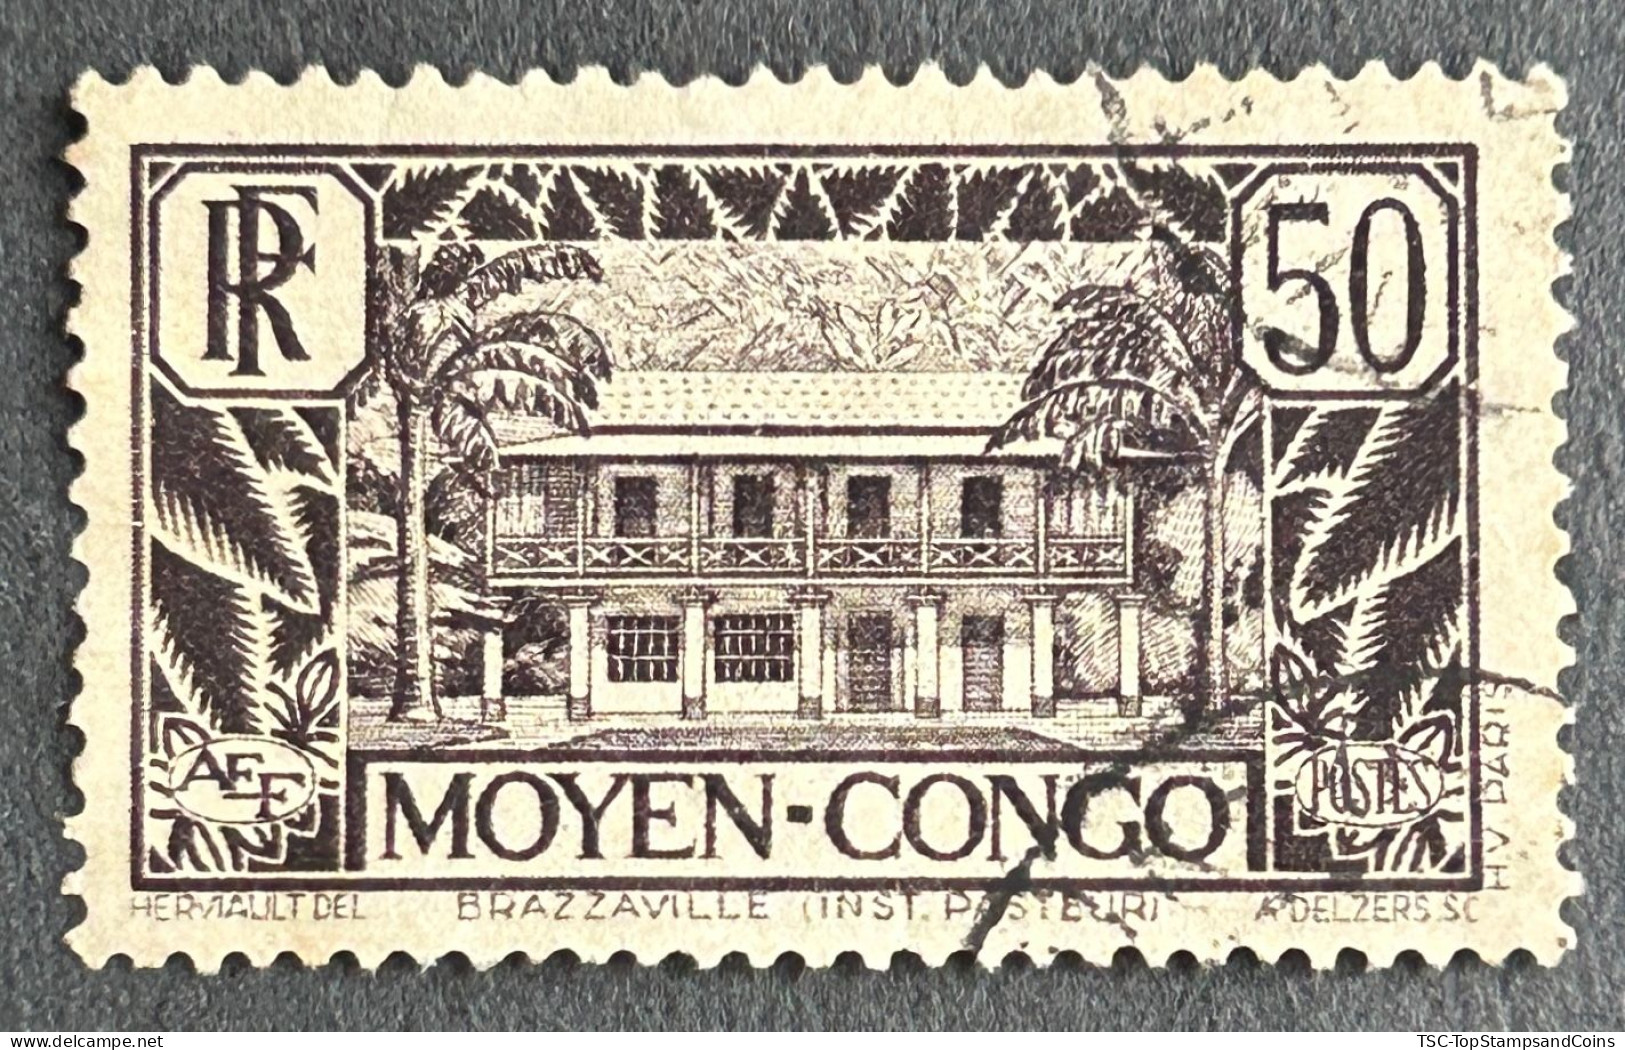 FRCG124U1 - Brazzaville - Pasteur Institute - 50 C Used Stamp - Middle Congo - 1933 - Used Stamps